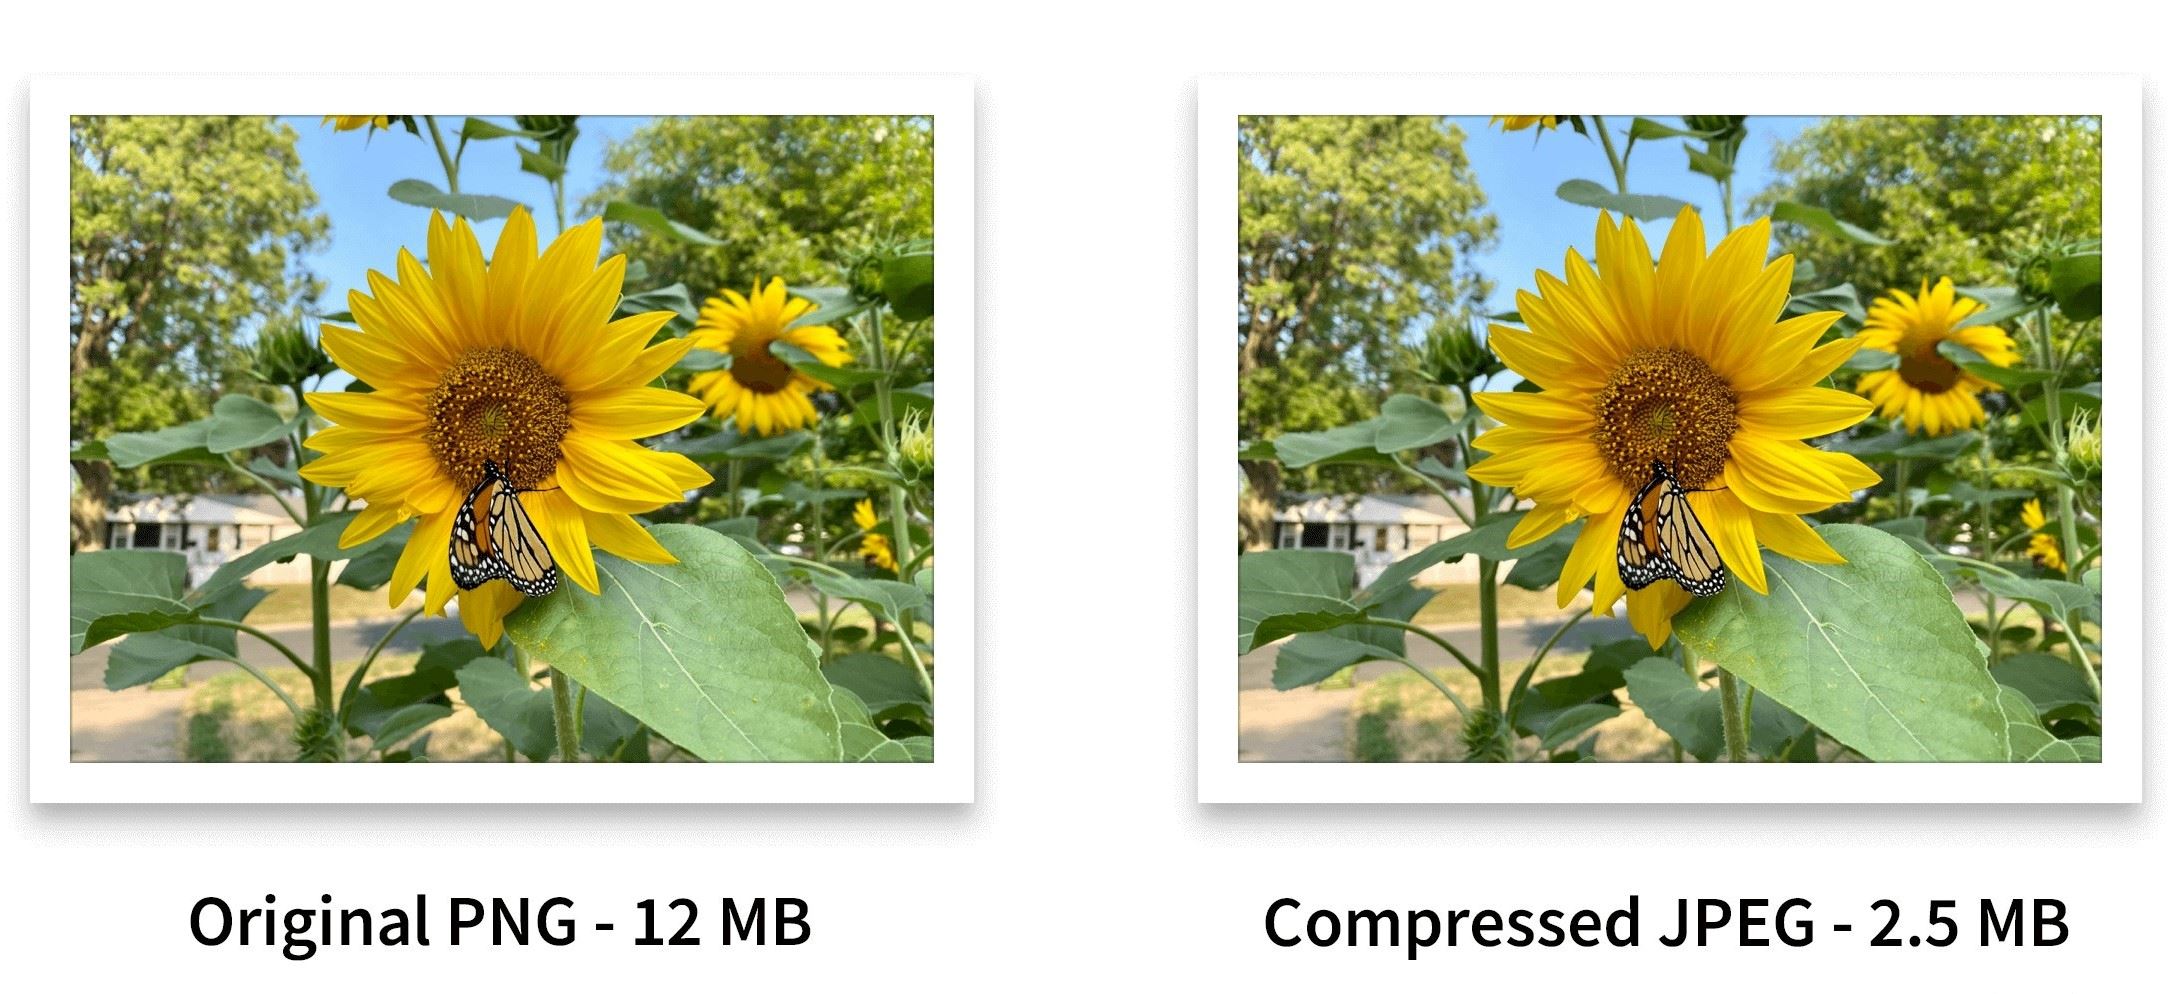 What Is Media File Compression?